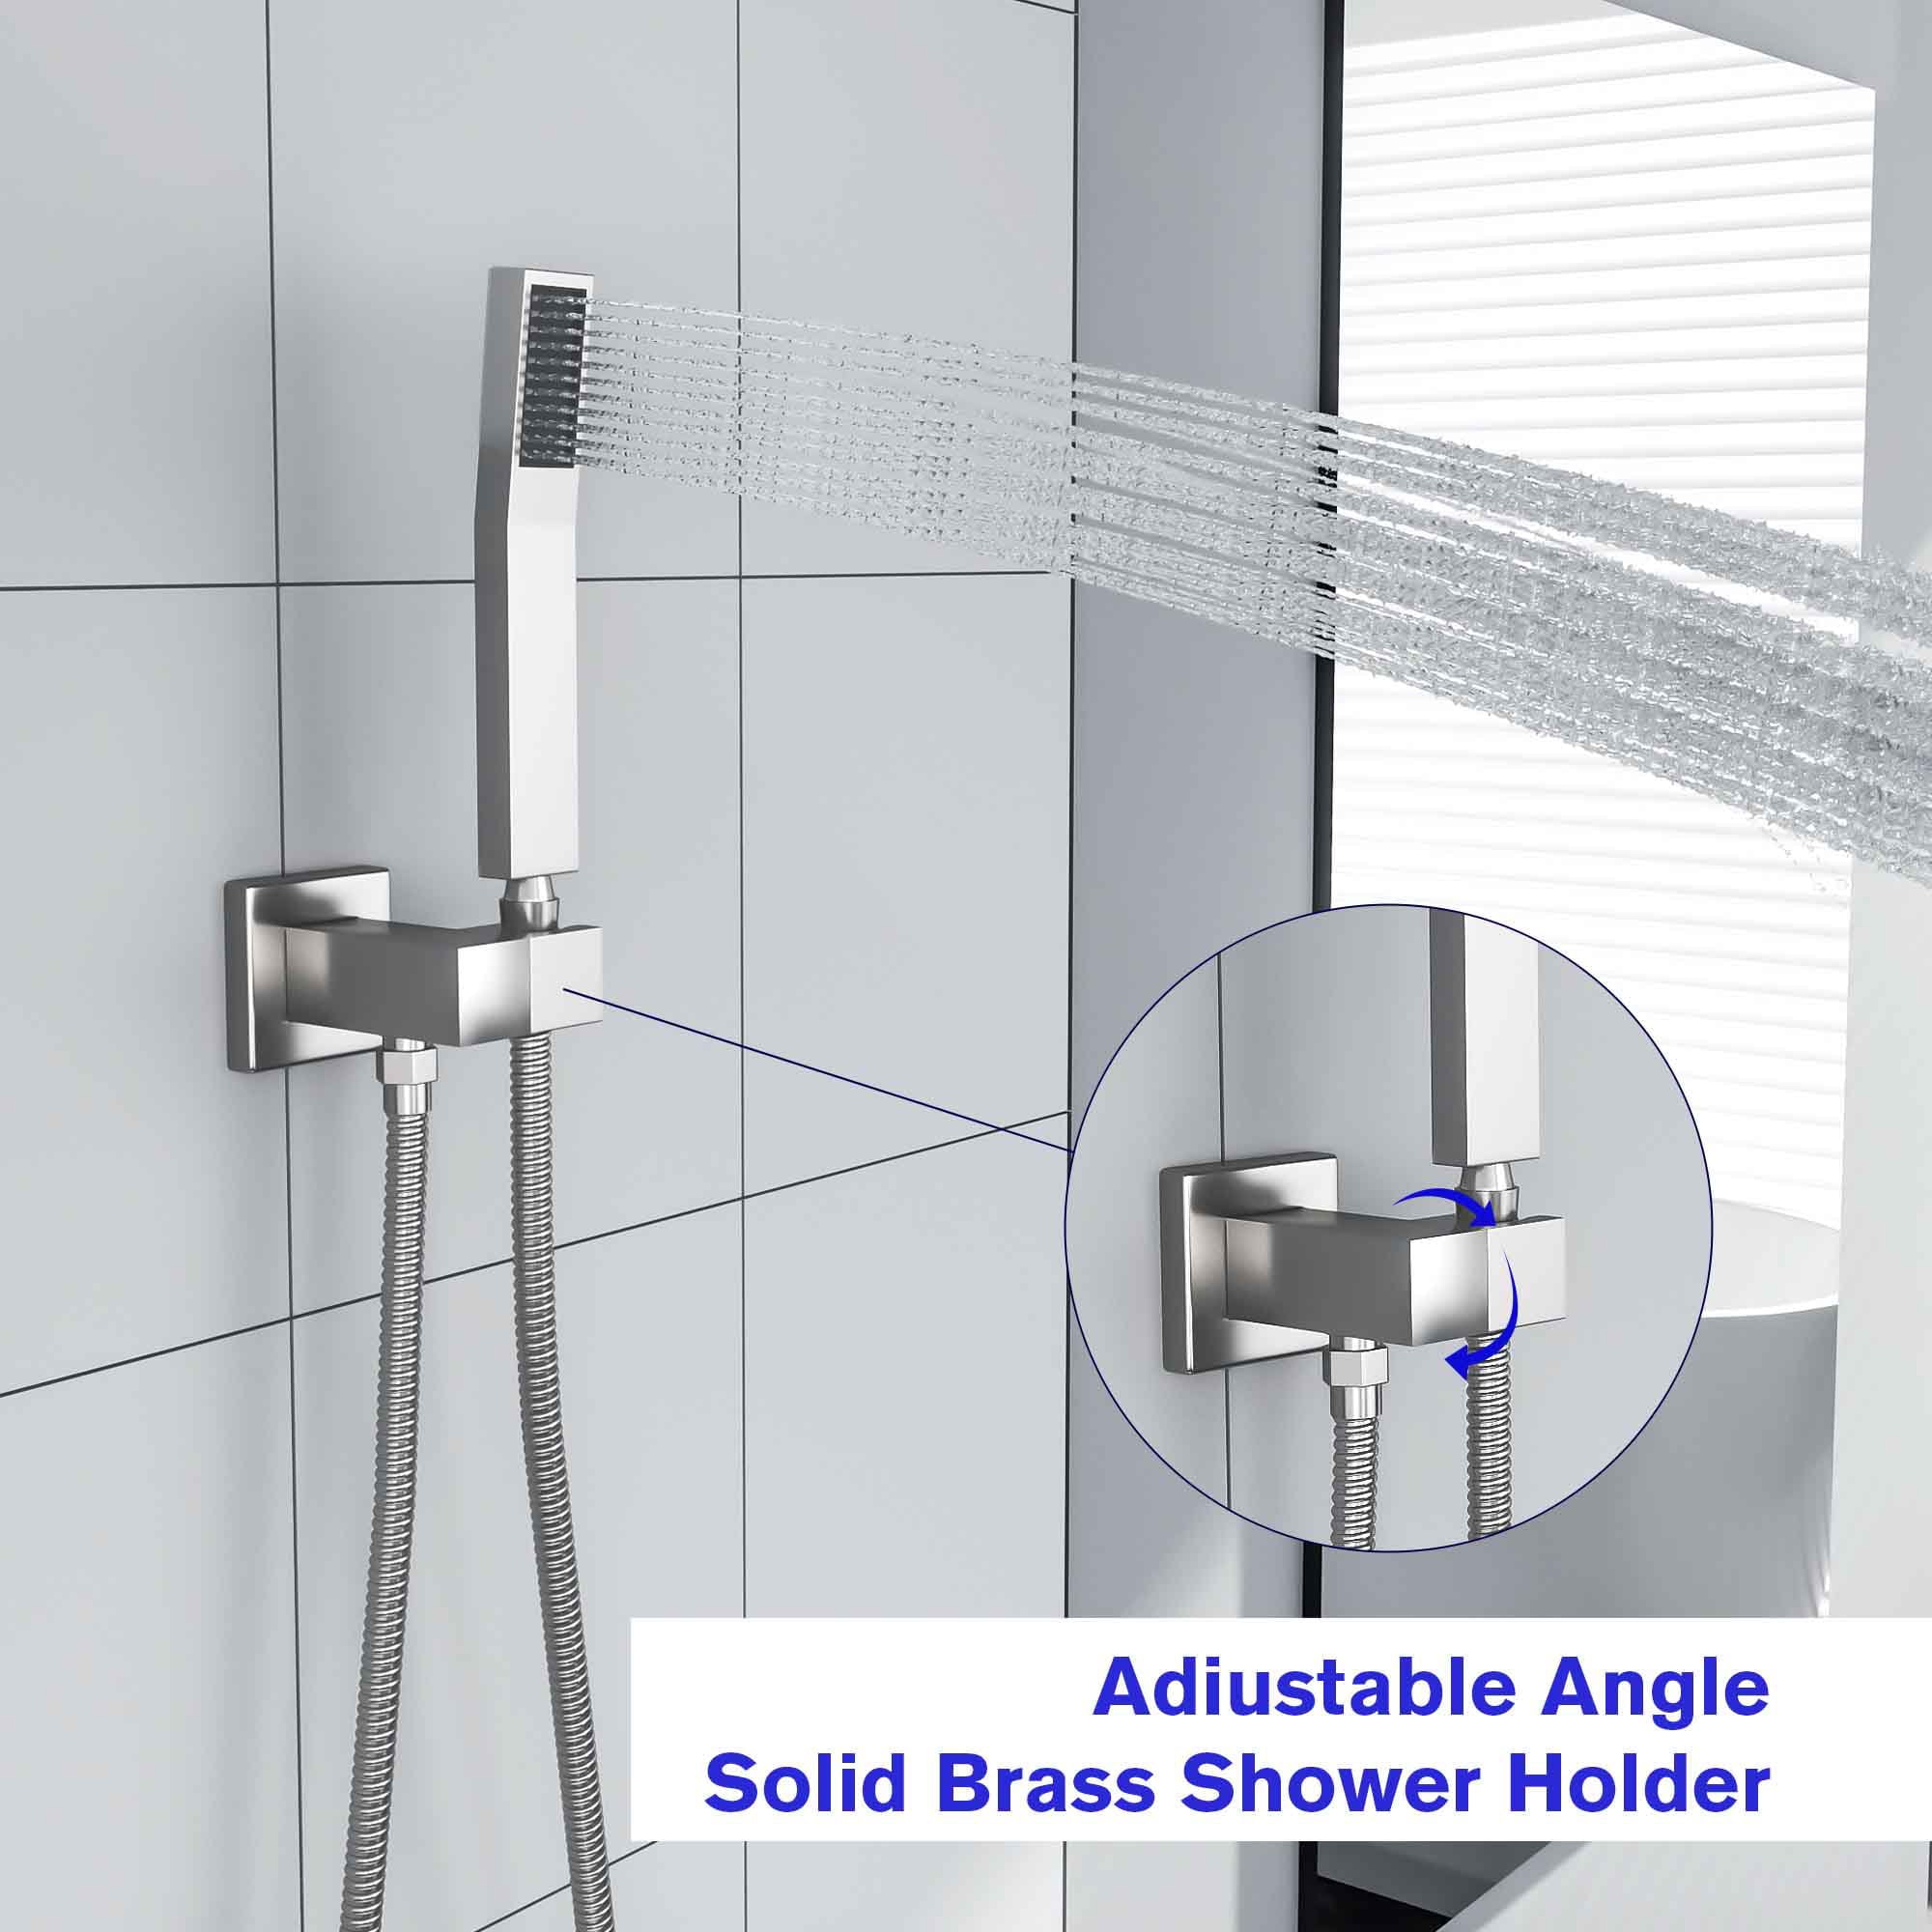 Lordear 10 inch Brushed Nickel Rain Shower Head System with Faucet | Rain Shower Mixer Set, Rainfall Shower Head, Rainfall Shower System, Shower, Shower Faucets & Systems, Shower System | Lordear